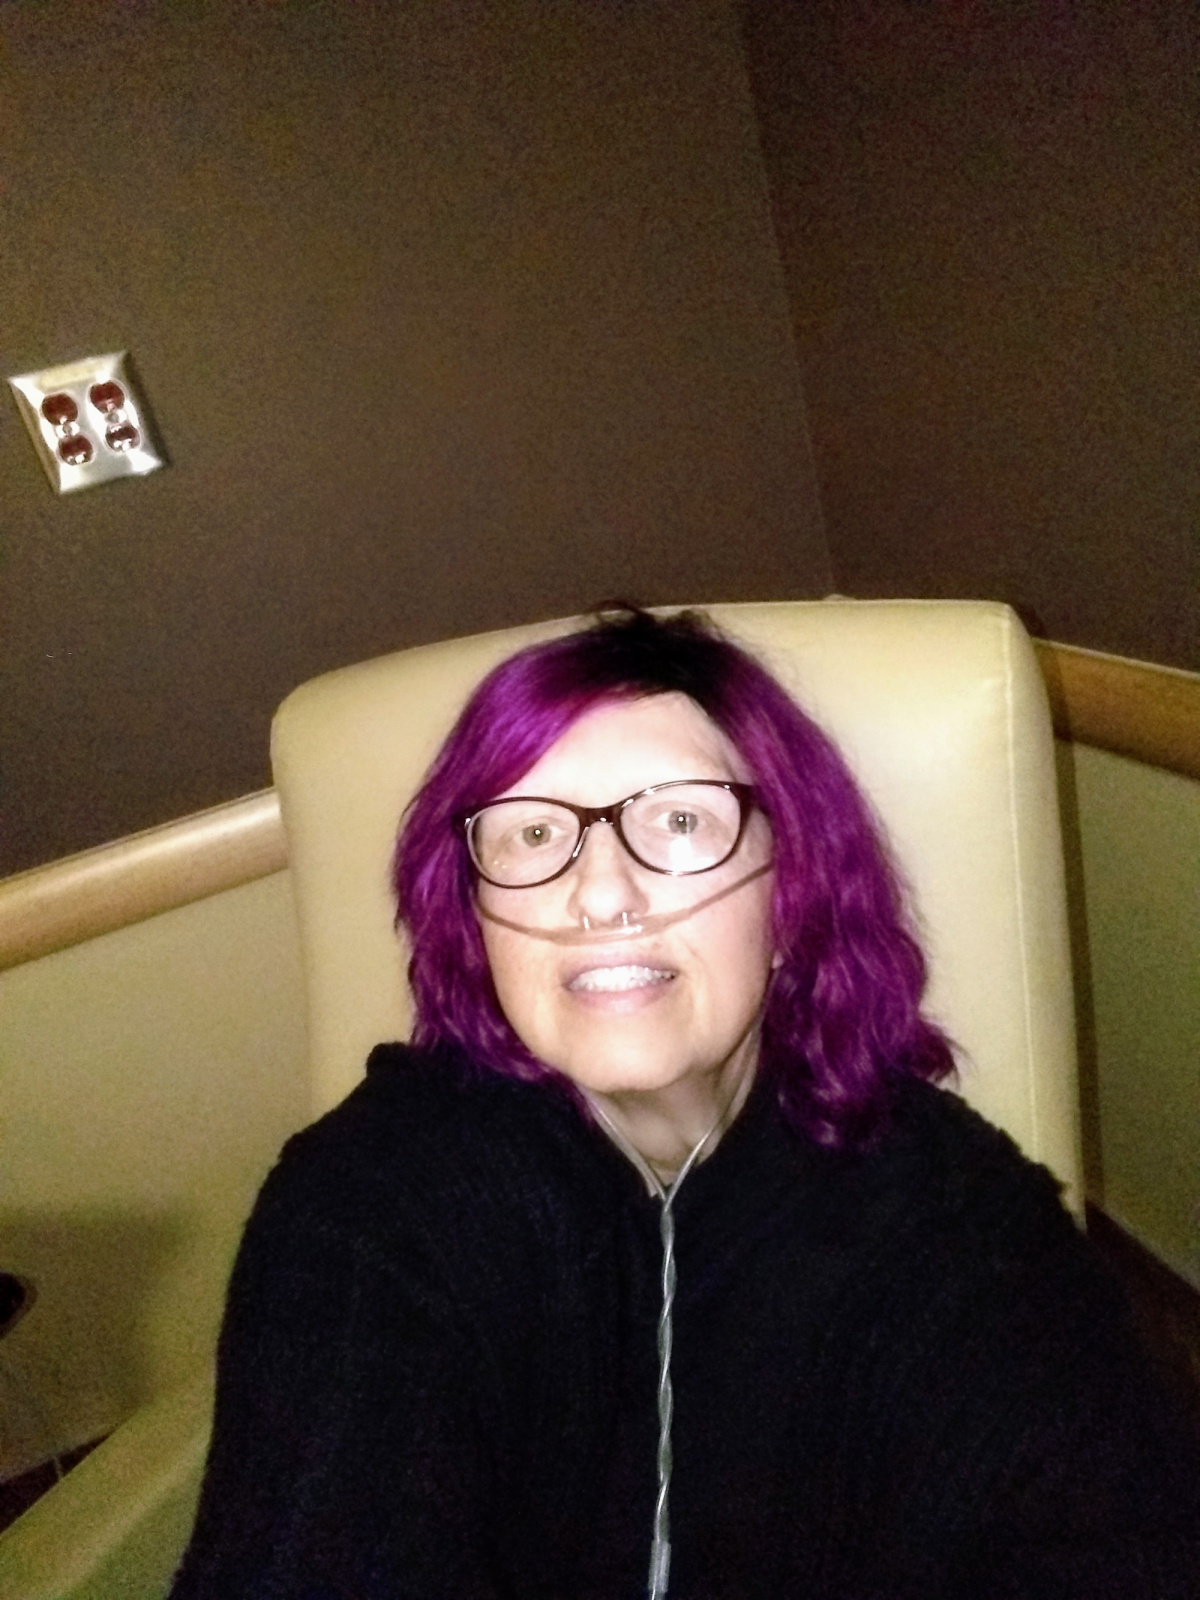 Me waiting for PET/CT scan yesterday. I am supposed to sit quietly and no nothing, also lay quietly and do nothing during scan.
I am not good at either.